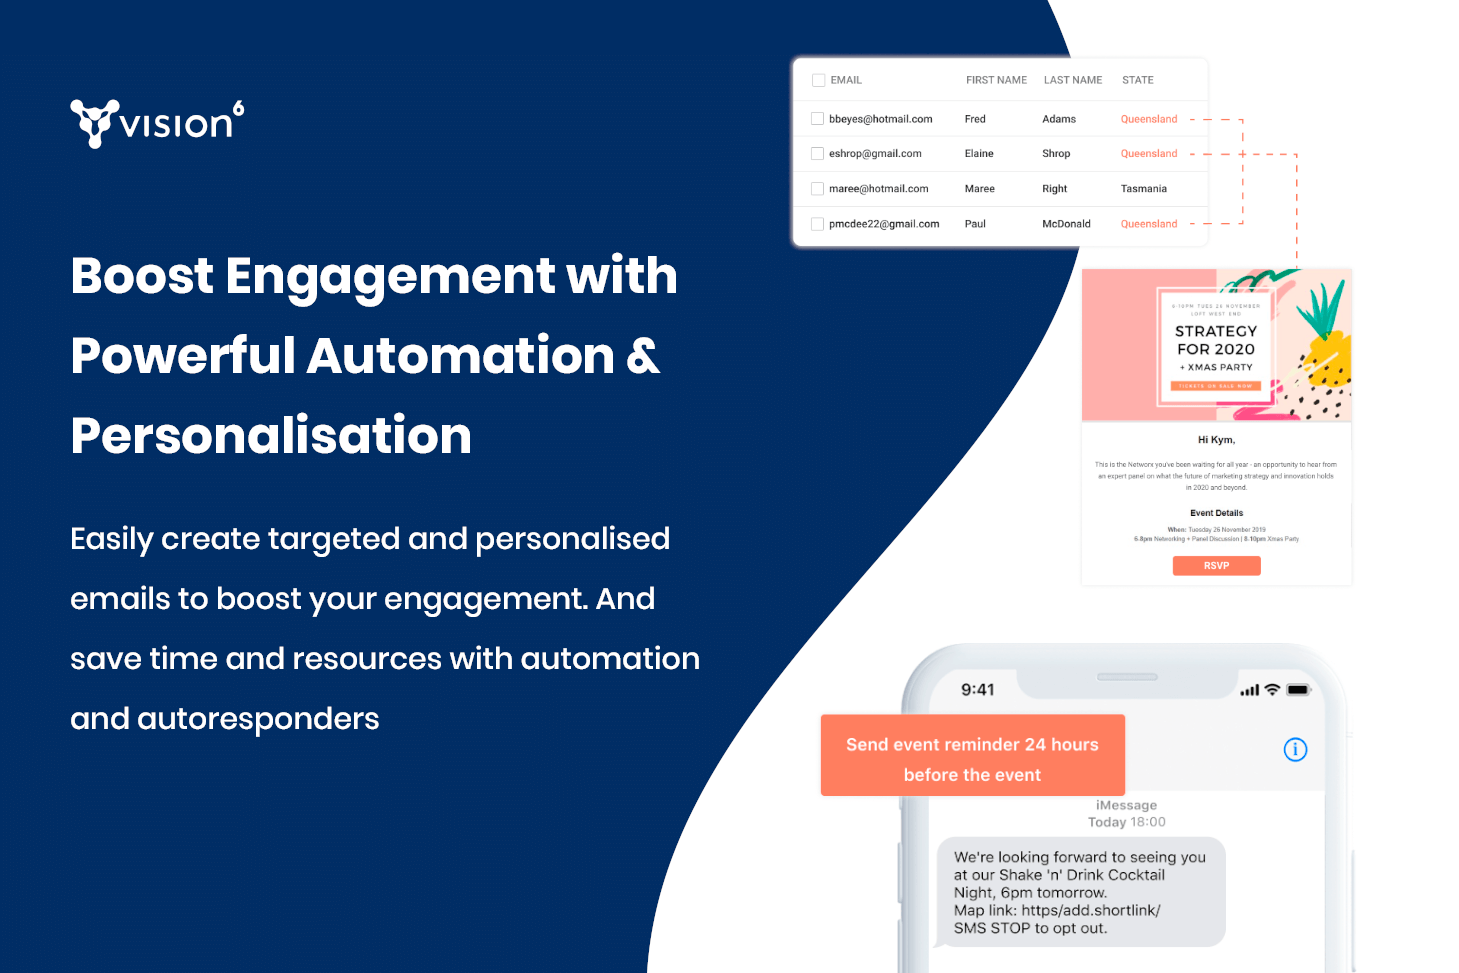 Boost Engagement with Email Marketing Automation